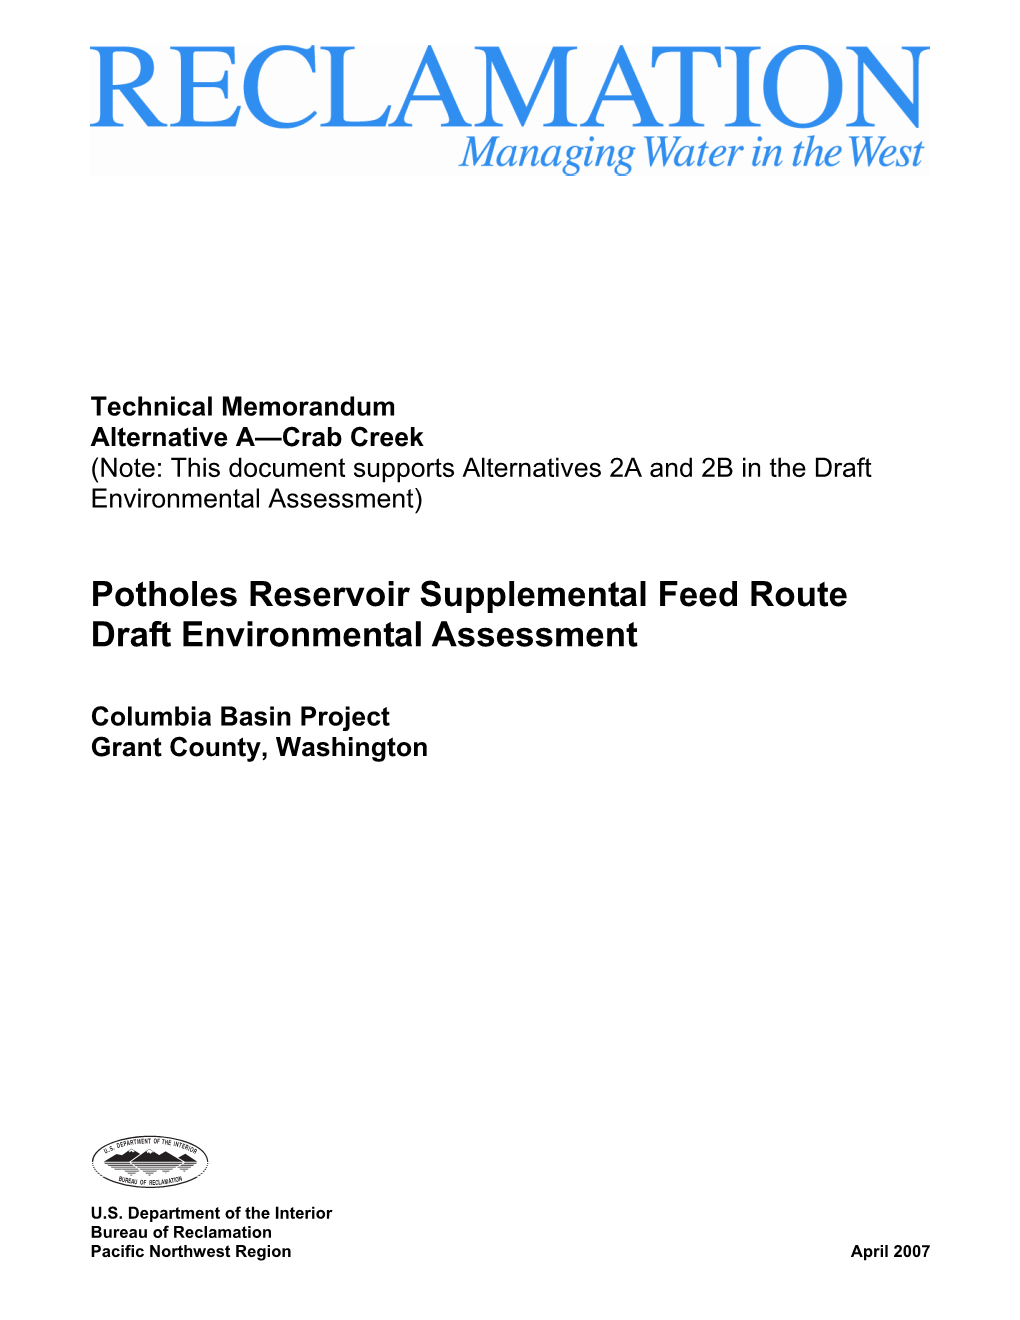 Crab Creek (Note: This Document Supports Alternatives 2A and 2B in the Draft Environmental Assessment)